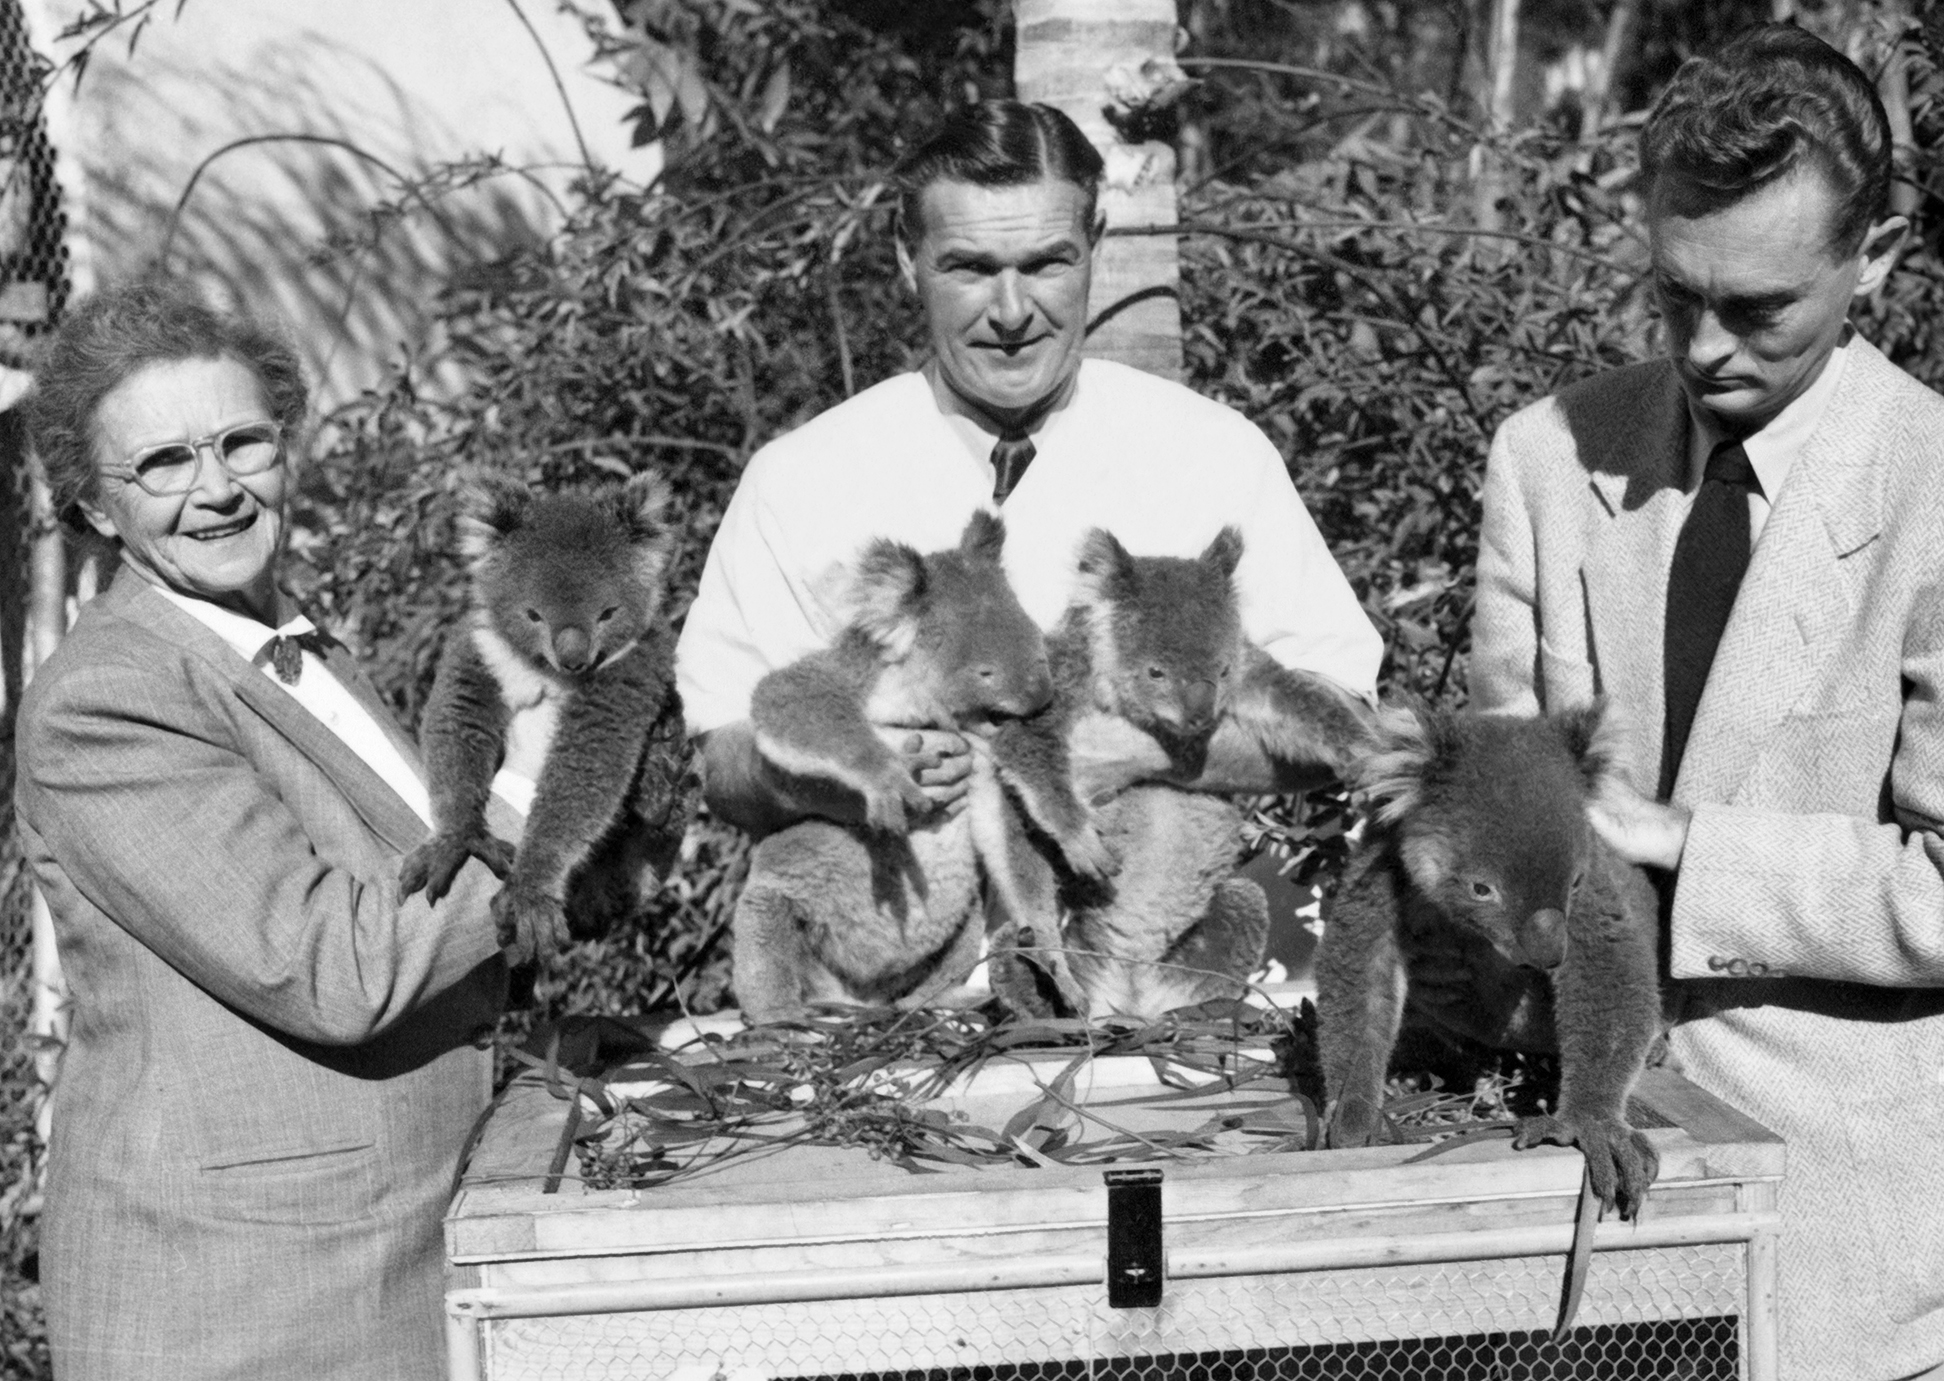 Belle Benchley, veterinarian Dr. Glen Crosbie, and mammal curator Ken Stott, Jr. welcome the four koalas that came from Australia to play their part in the Hollywood film Botany Bay.